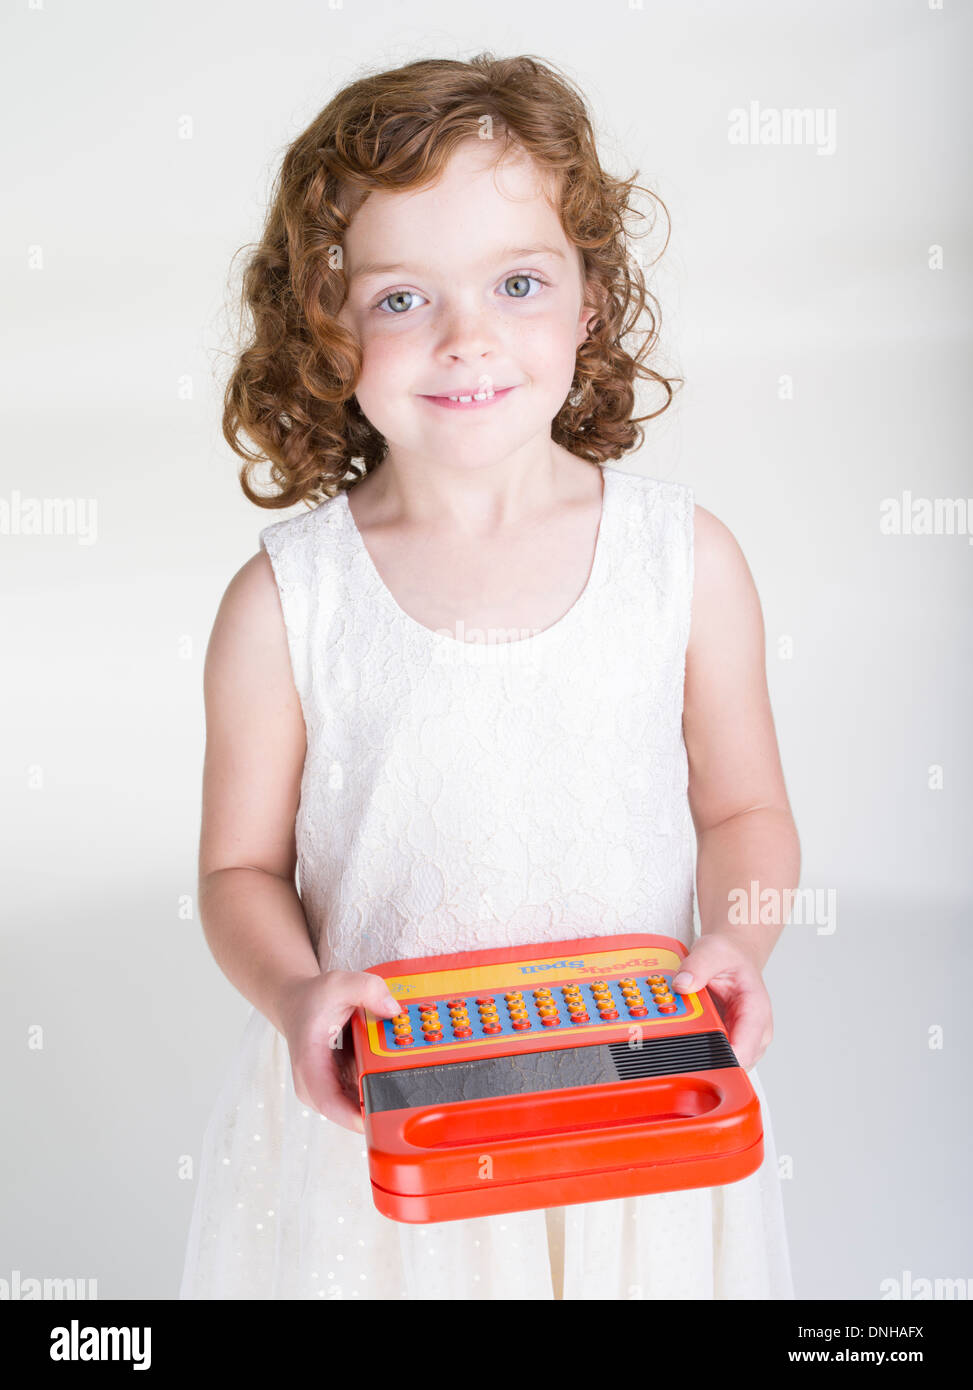 Young girl with 1978 Speak and Spell Toy by Texas Instruments Stock Photo